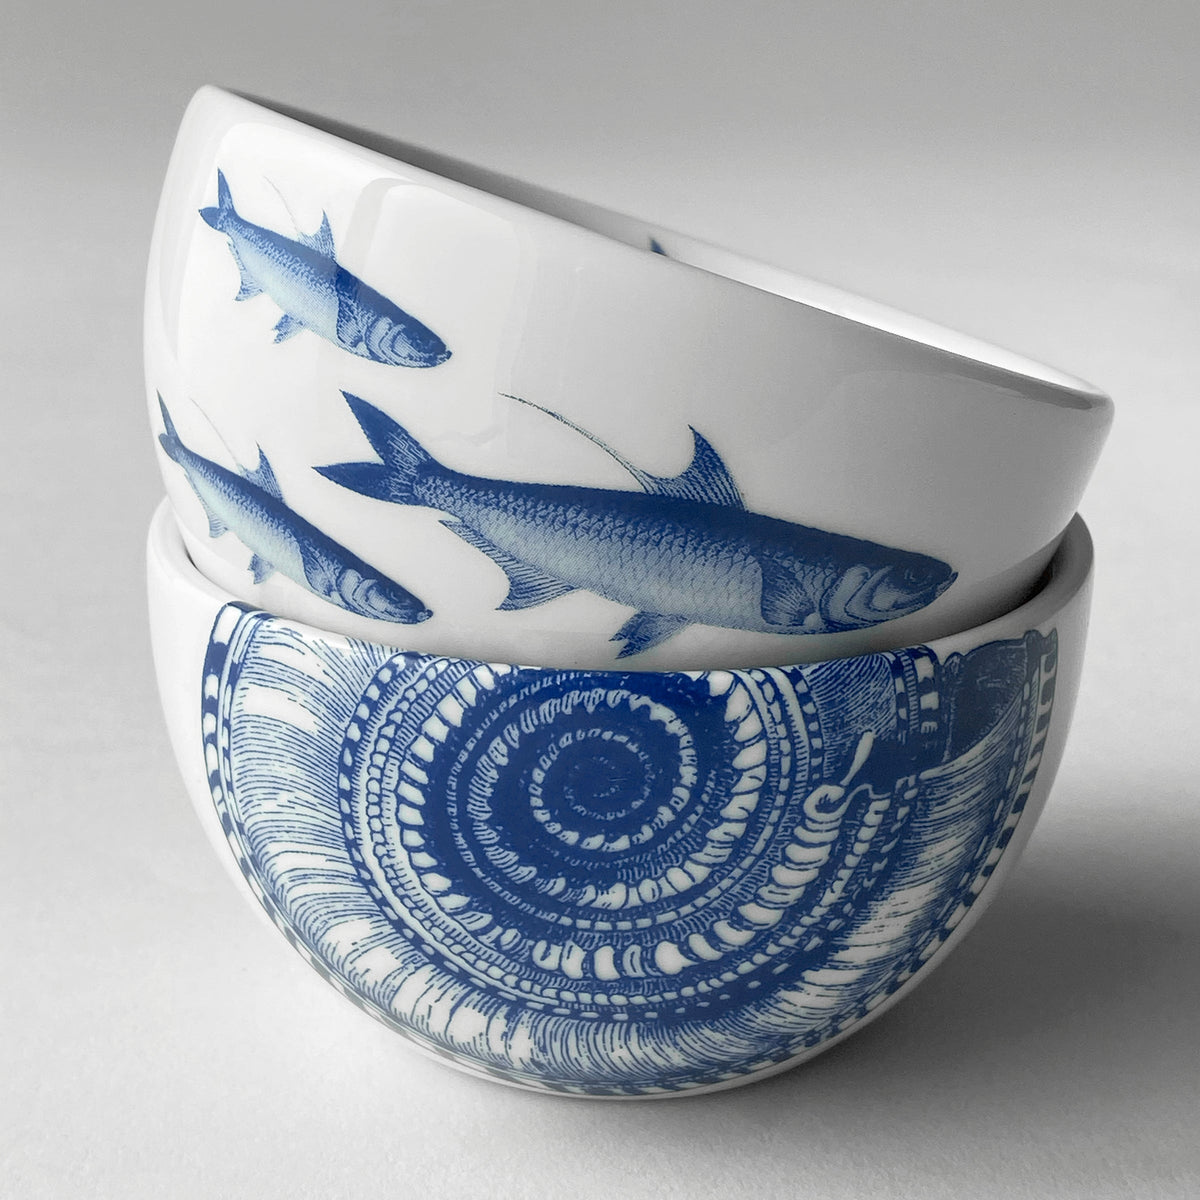 Two blue and white School of Fish Snack Bowls with a school of fish on them by Caskata Artisanal Home.